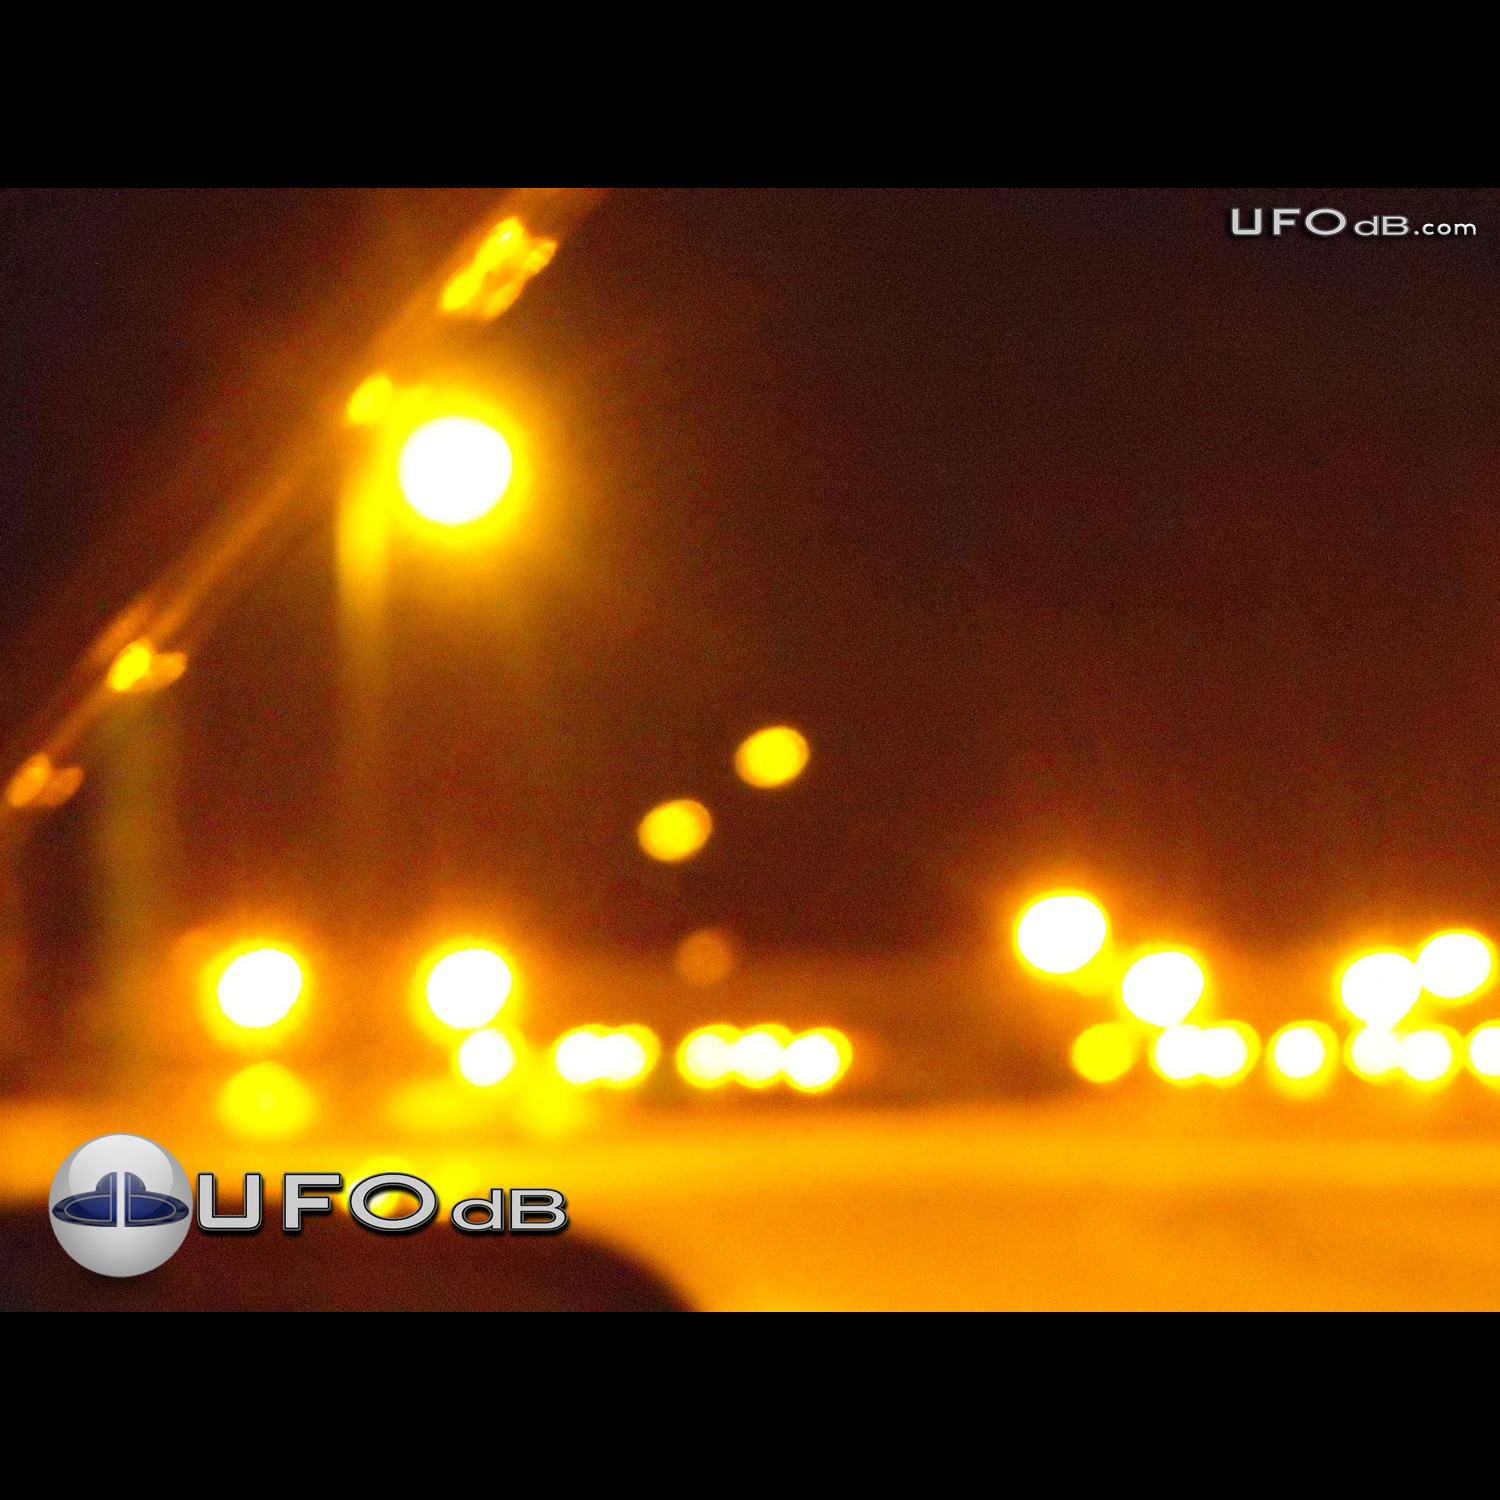 Pulsating Orange UFOs near Fort Carson Army Base | USA | May 12 2011 UFO Picture #310-1